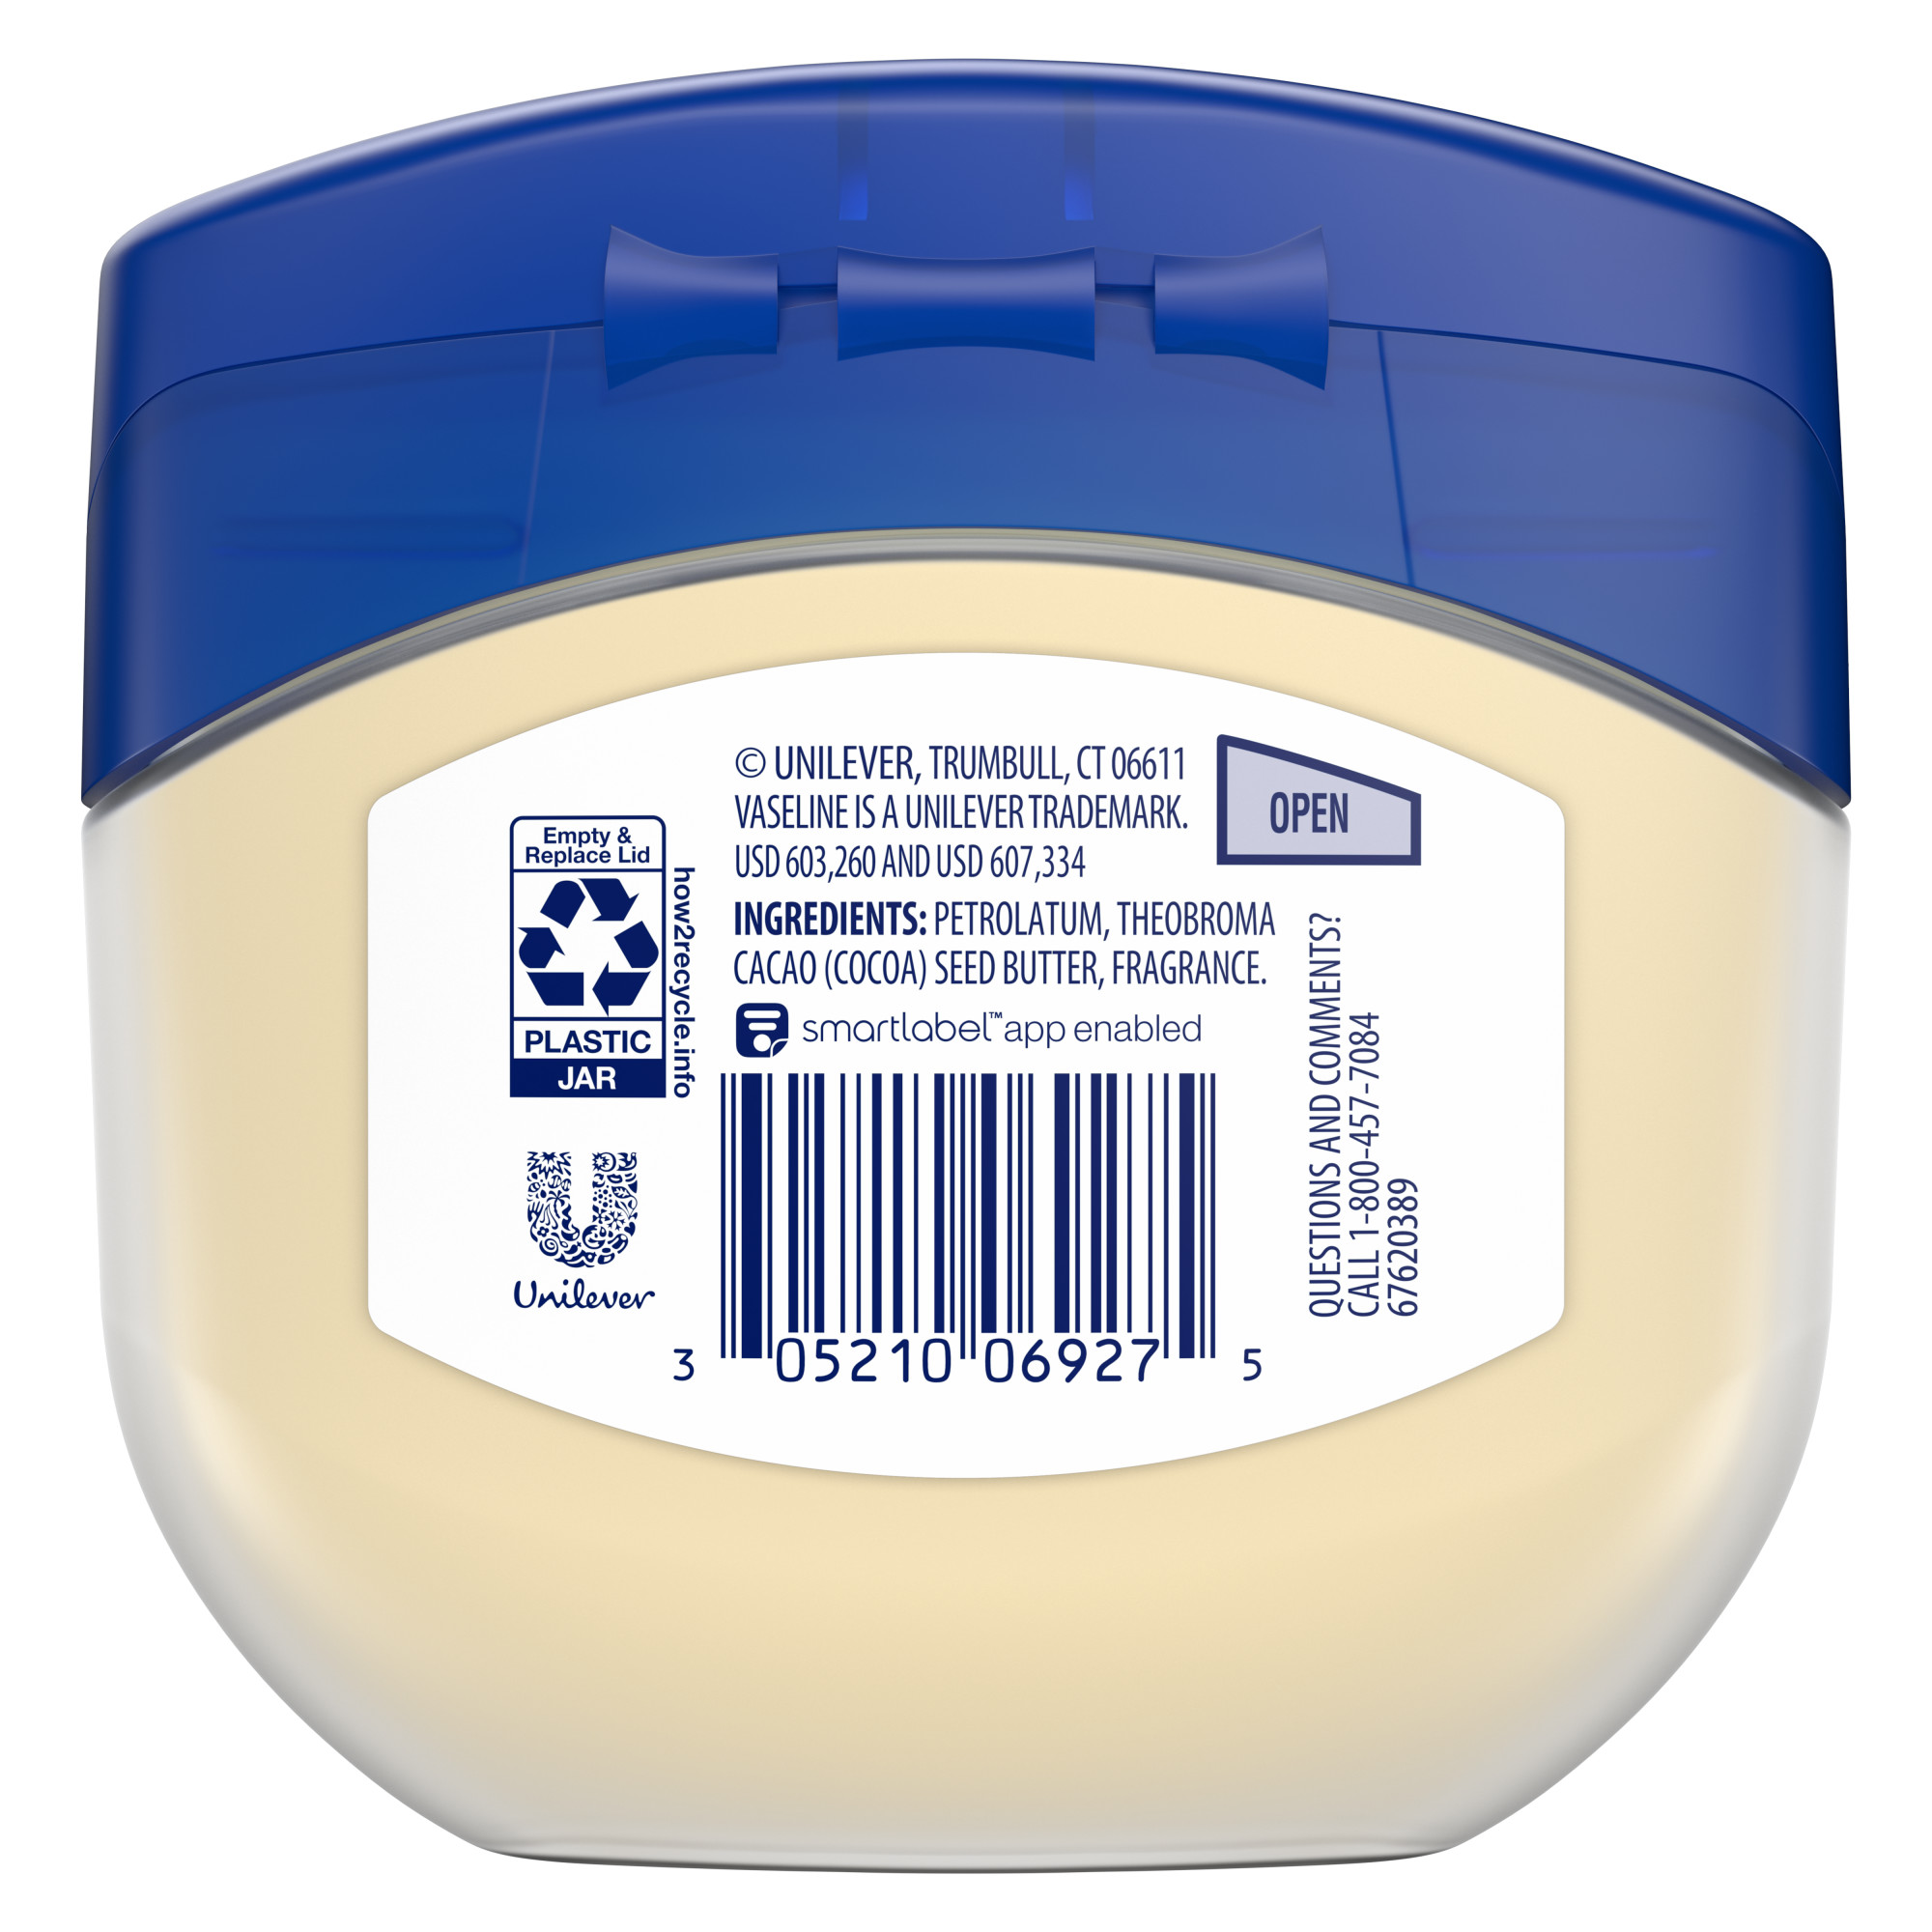 Vaseline Lock In Moisture Cocoa Butter Healing Petroleum Jelly for Dry Skin, 7.5 oz - image 2 of 5